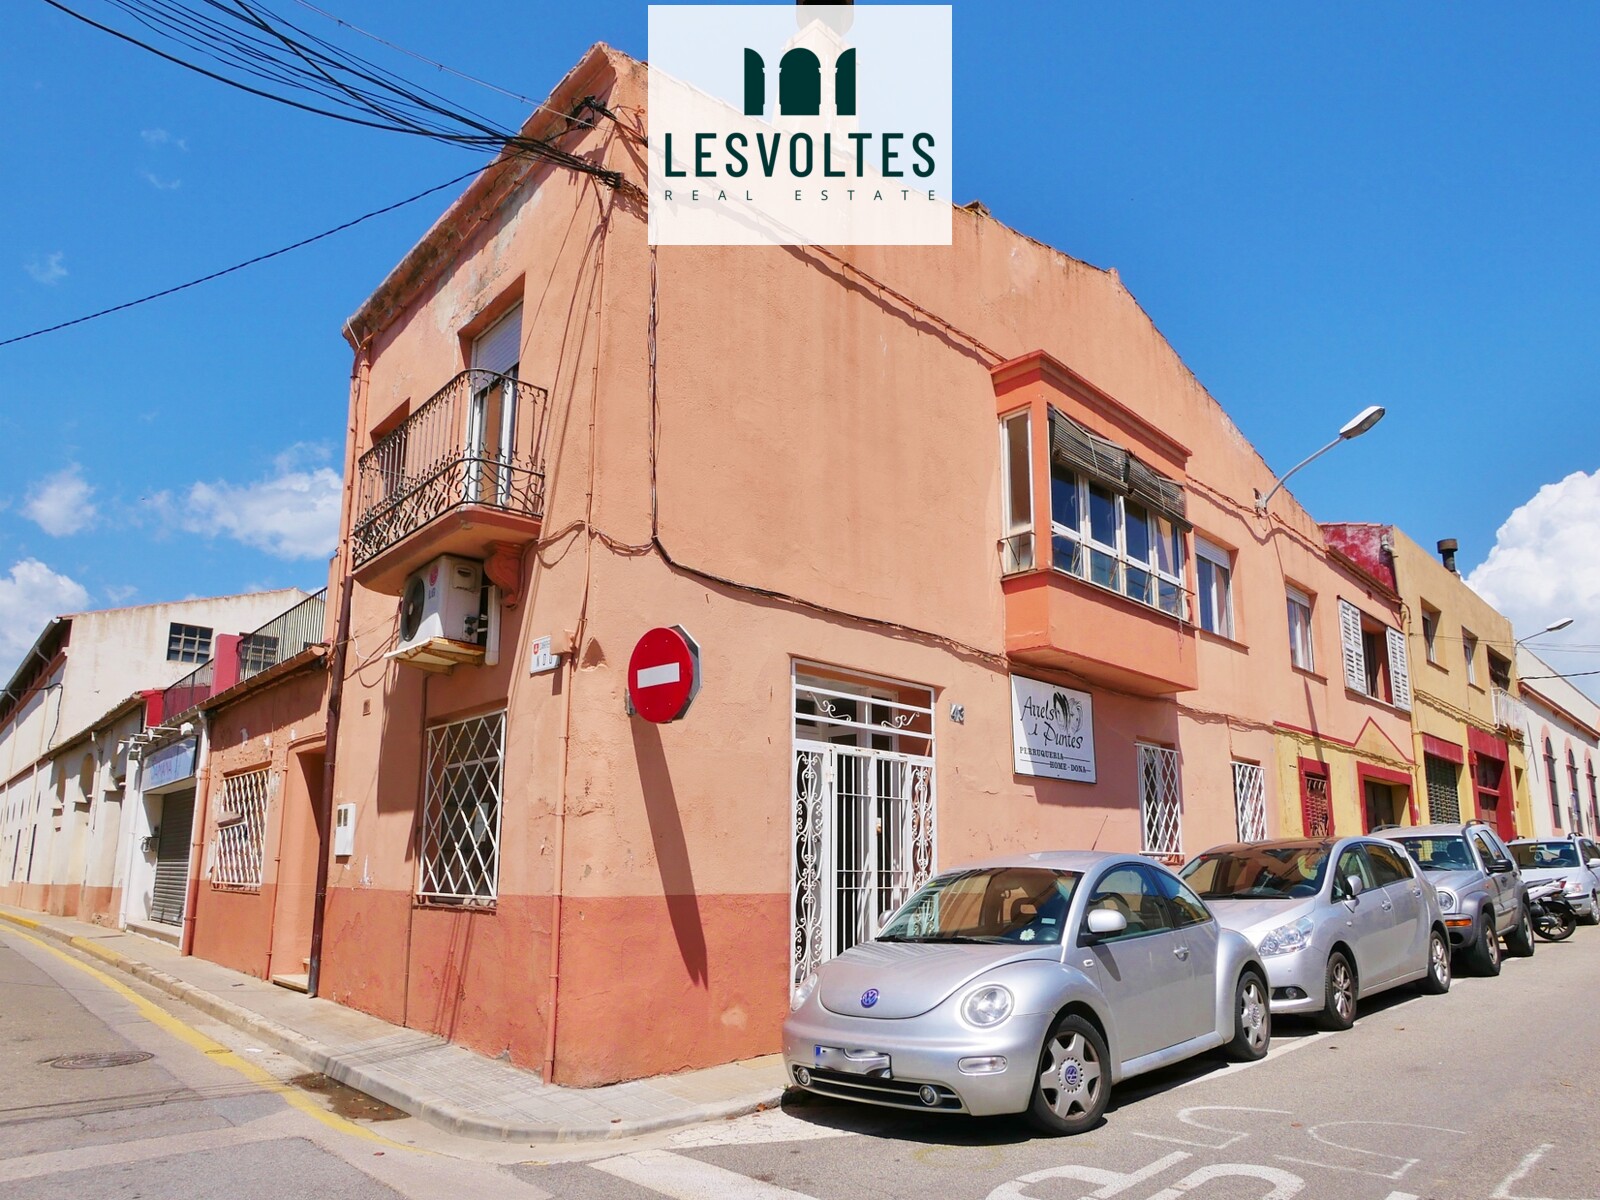 LARGE CORNER PROPERTY FOR SALE IN THE CENTER OF PALAFRUGELL WITH MANY POSSIBILITIES.